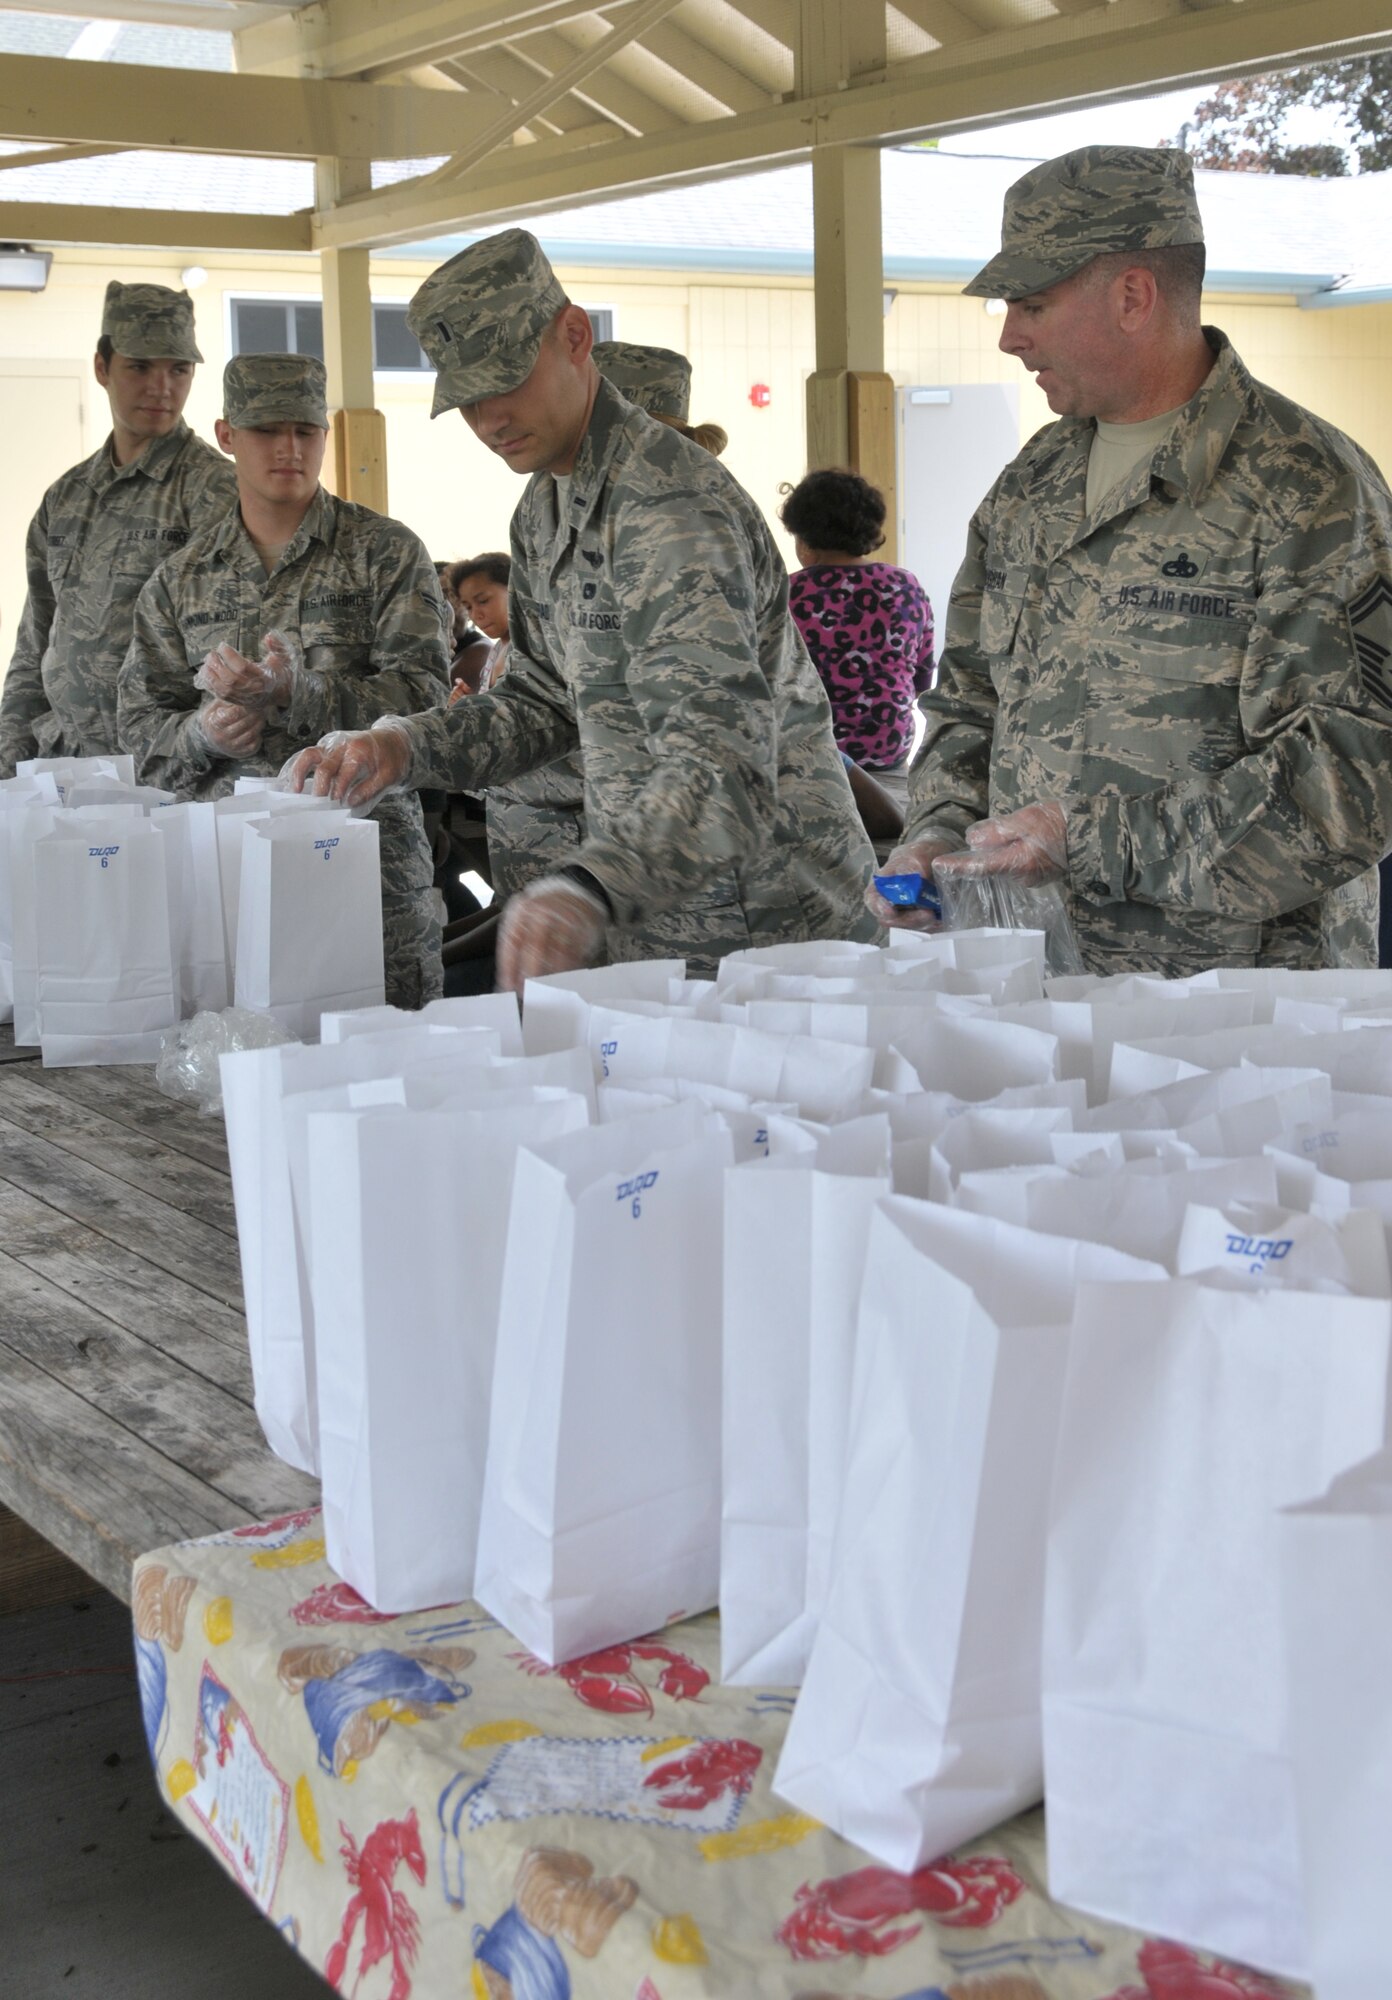 (From left) Airman 1st Class Daniel Street, Airman 1st Class Elijah Hammond-Wood, 1st Lt. Jared Semerad and Senior Master Sgt. Kevin Moughan hand out lunches to youth at Steinmetz Park in Schenectady, New York, July 25, 2014. About 30 Airmen from the 109th Airlift Wing volunteered throughout the week to help with Schenectady Inner City Ministry's Summer Lunch Program. The ministry has been providing free lunches to youth throughout Schenectady for 20 years. Street and Hammond-Wood  are with the 139th Aeromedical Evacuation Squadron; Semerad is assigned to the 109th Logistics Readiness Squadron; and Moughan is assigned to the 109th Maintenance Group. (U.S. Air National Guard photo by Tech. Sgt. Catharine Schmidt/Released)